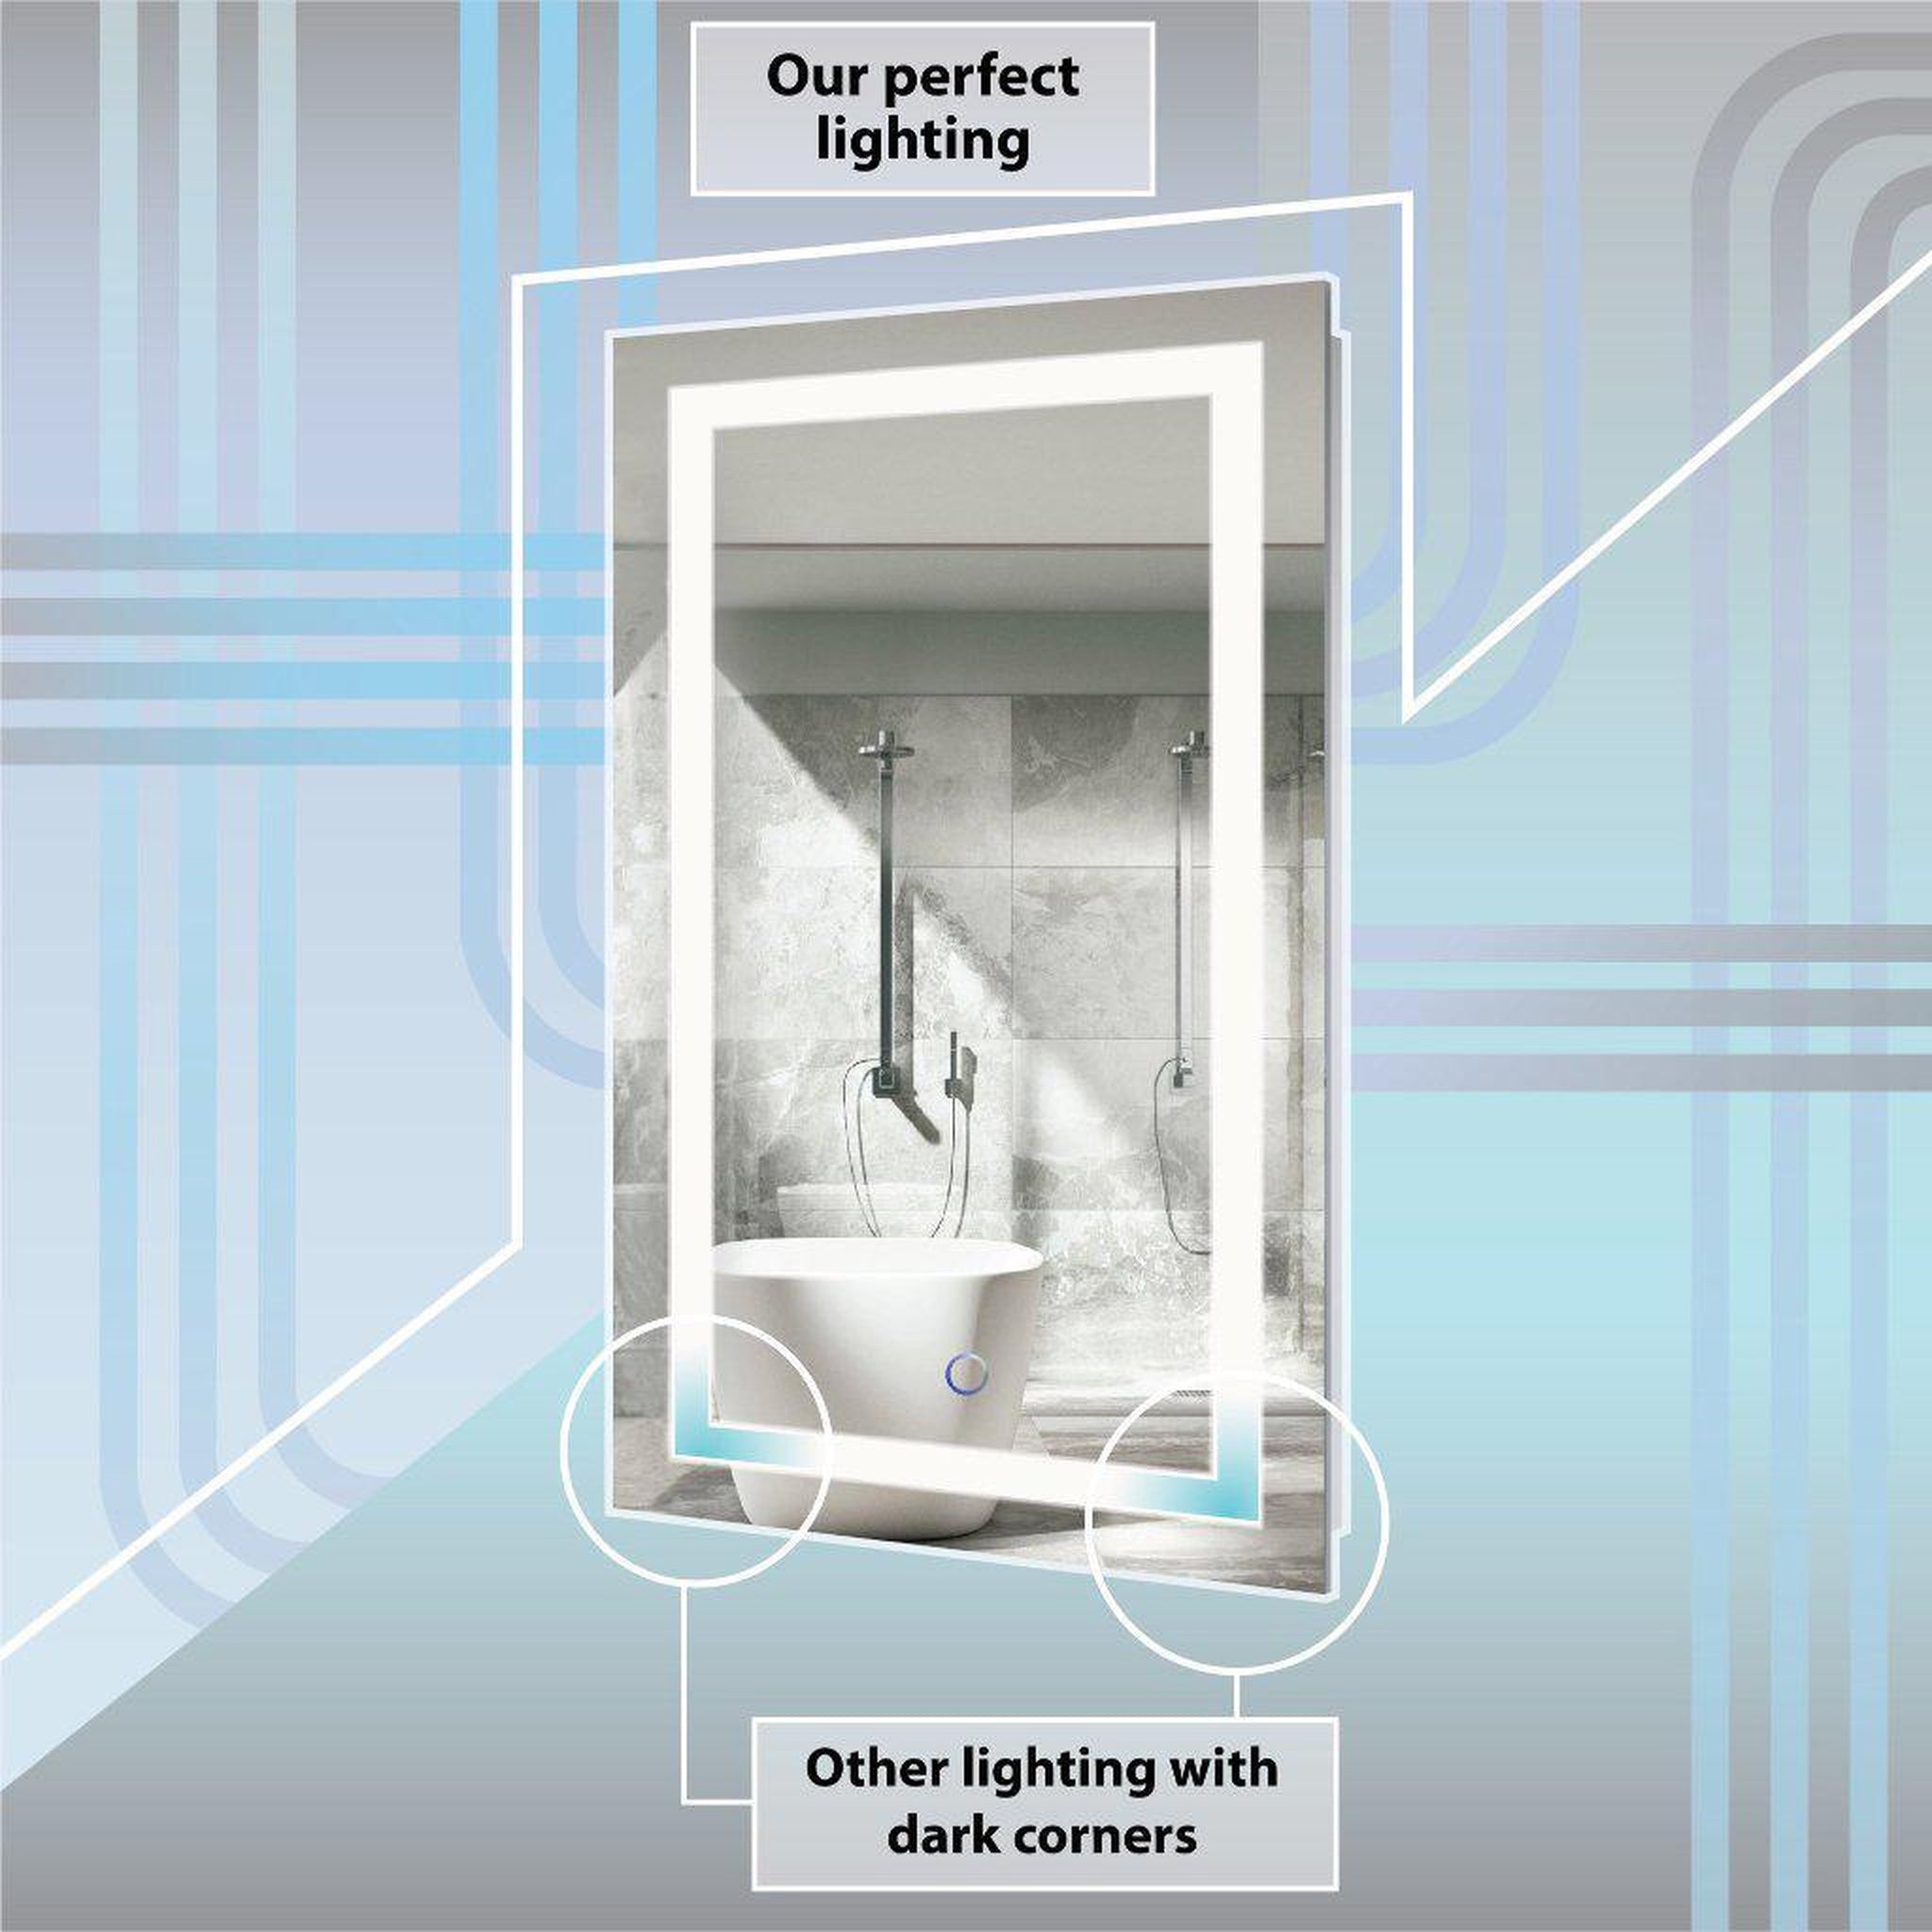 Krugg Reflections, Krugg Reflections Rolls 20" x 30" Single Right Opening Rectangular Recessed/Surface-Mount Illuminated Silver Backed LED Medicine Cabinet Mirror With Built-in Defogger, Dimmer and Electrical Outlet